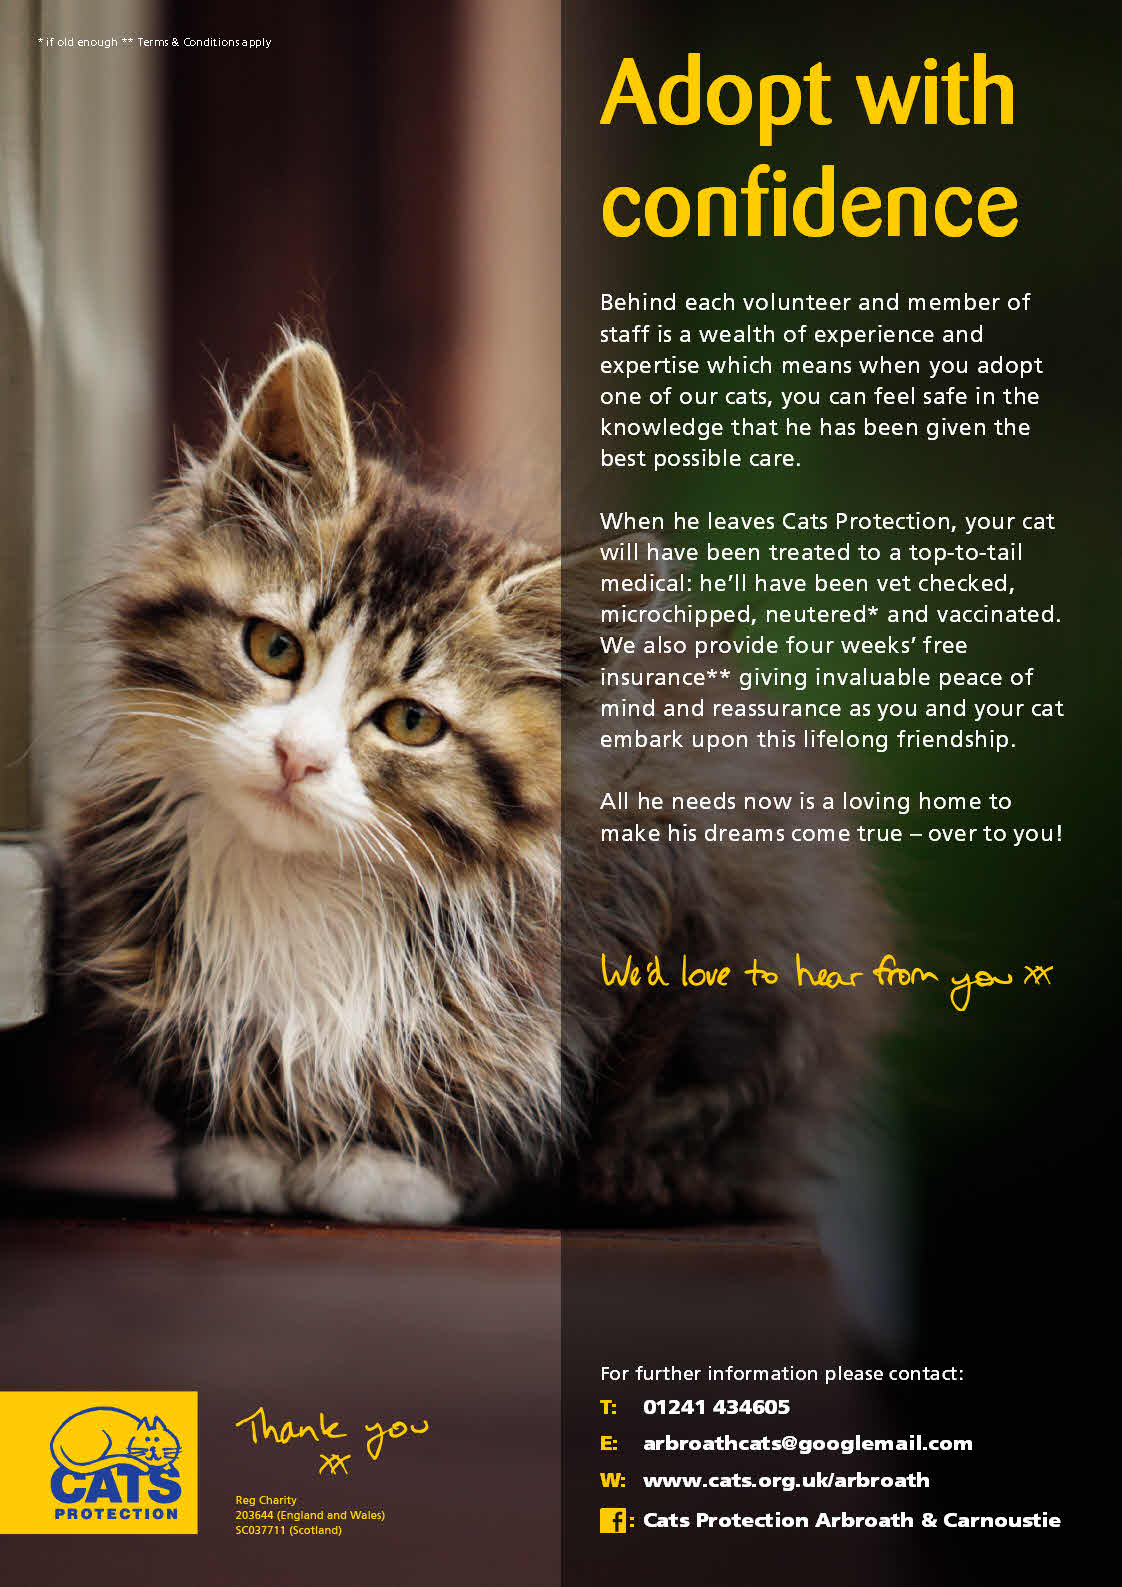 Calling Cats Protection National Cat Adoption Centre Facebook